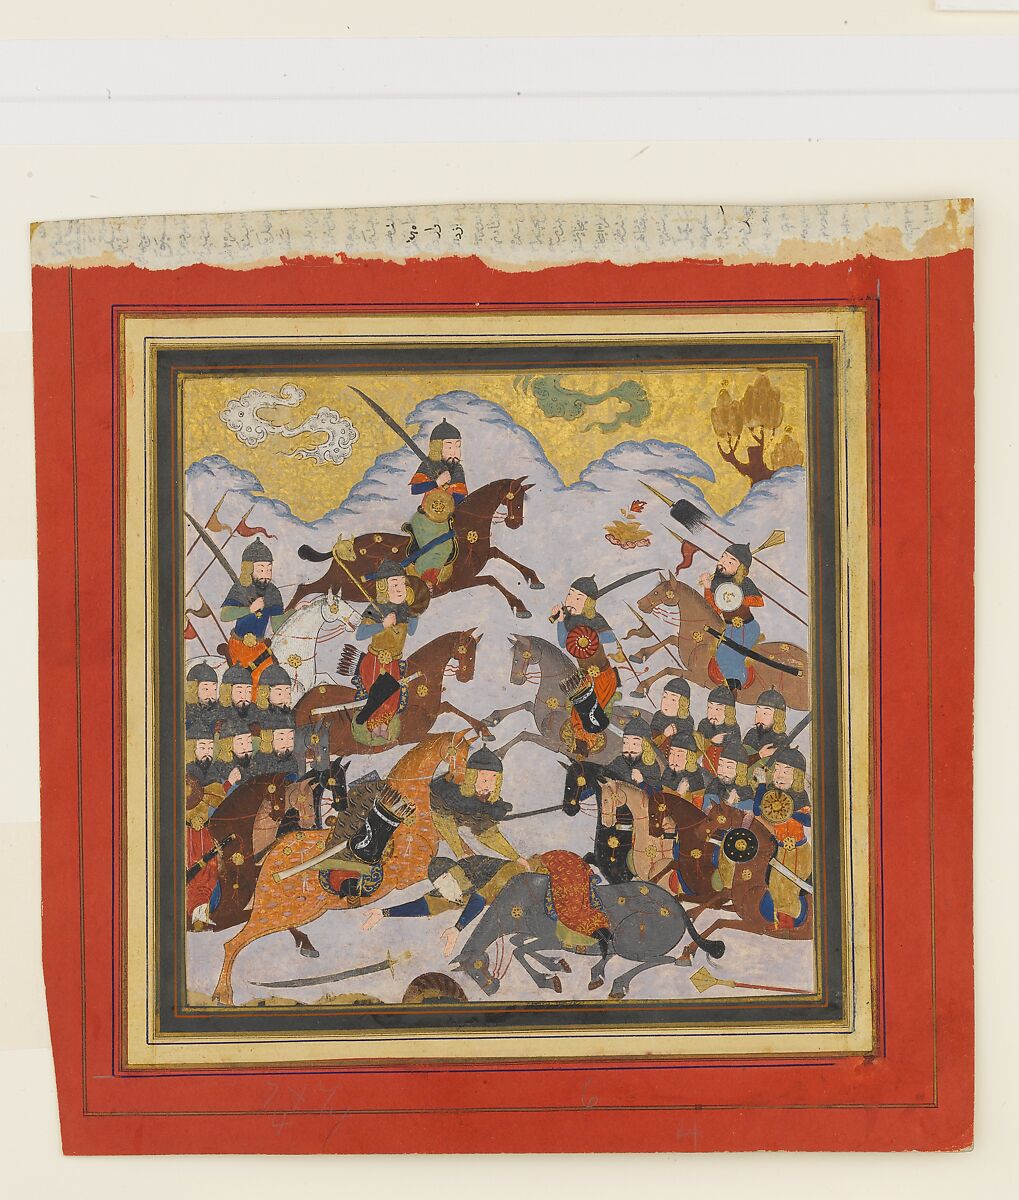 "Rustam Seizes Afrasiyab by the Girdle and Lifts him from the Saddle", Folio from a Shahnama (Book of Kings), Abu'l Qasim Firdausi  Iranian, Main support: Ink, opaque watercolor, gold on paper<br/>Margins: Ink and gold on dyed paper